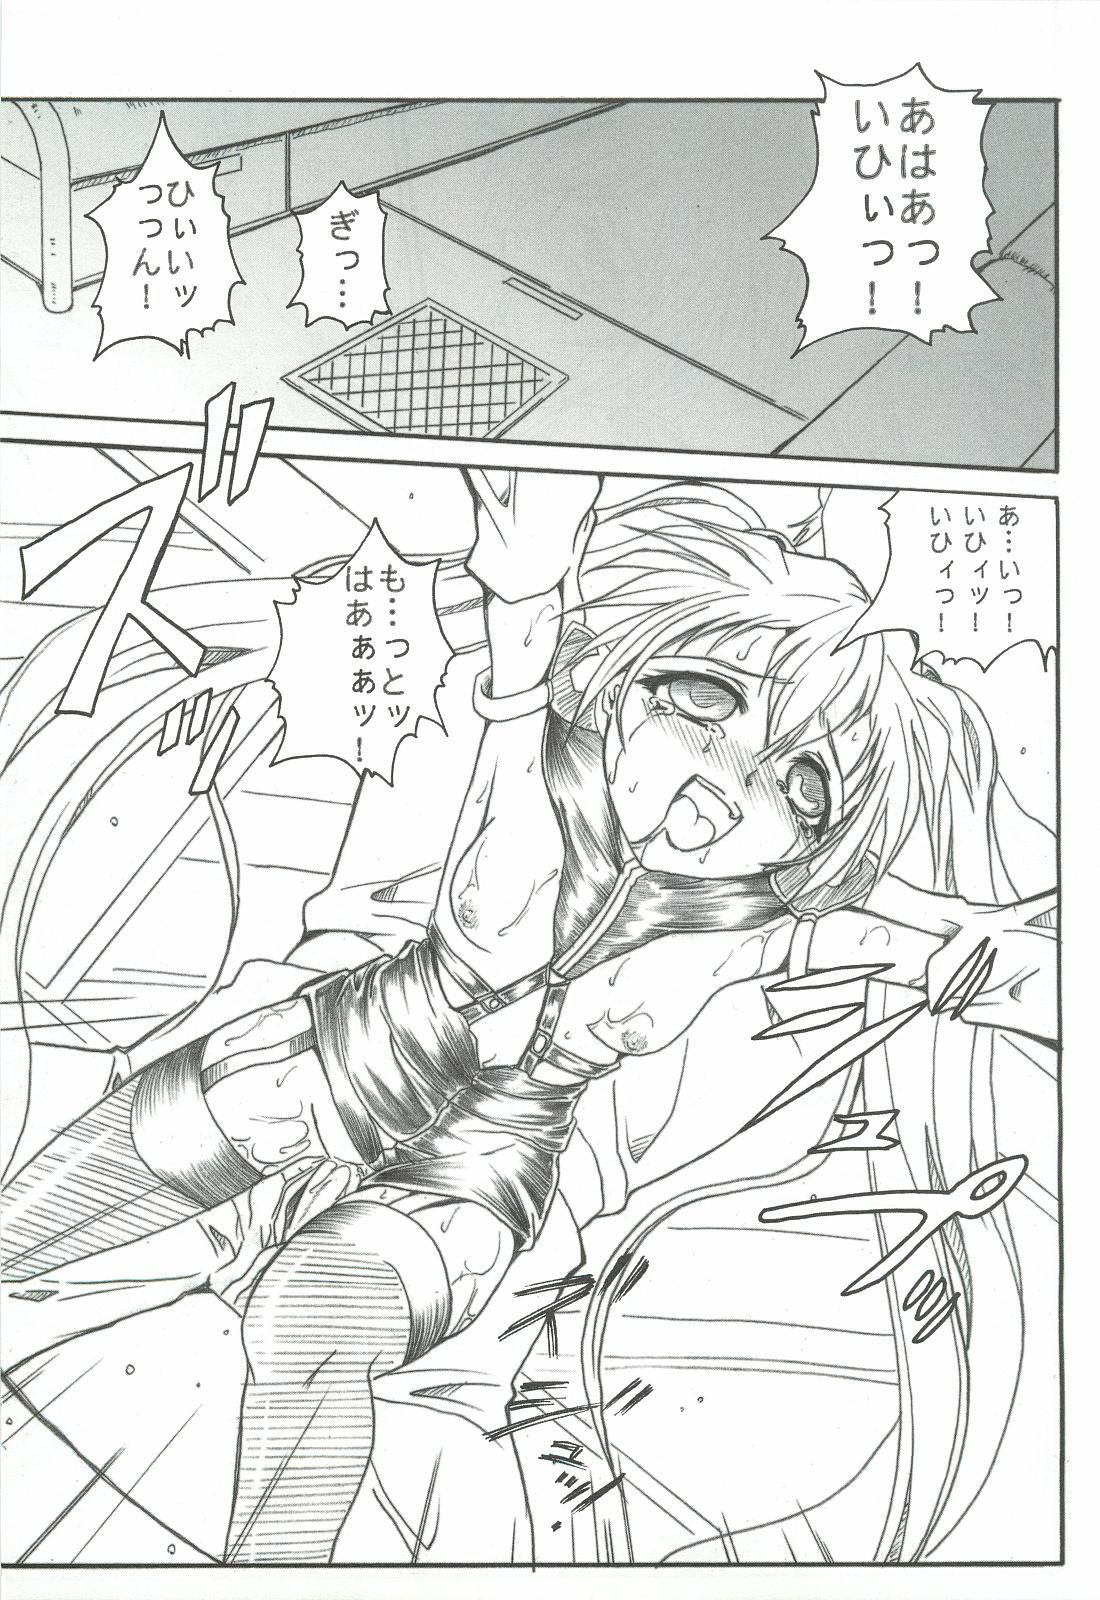 Yanks Featured SOLID STATE 8 - Martian successor nadesico Fishnets - Page 8